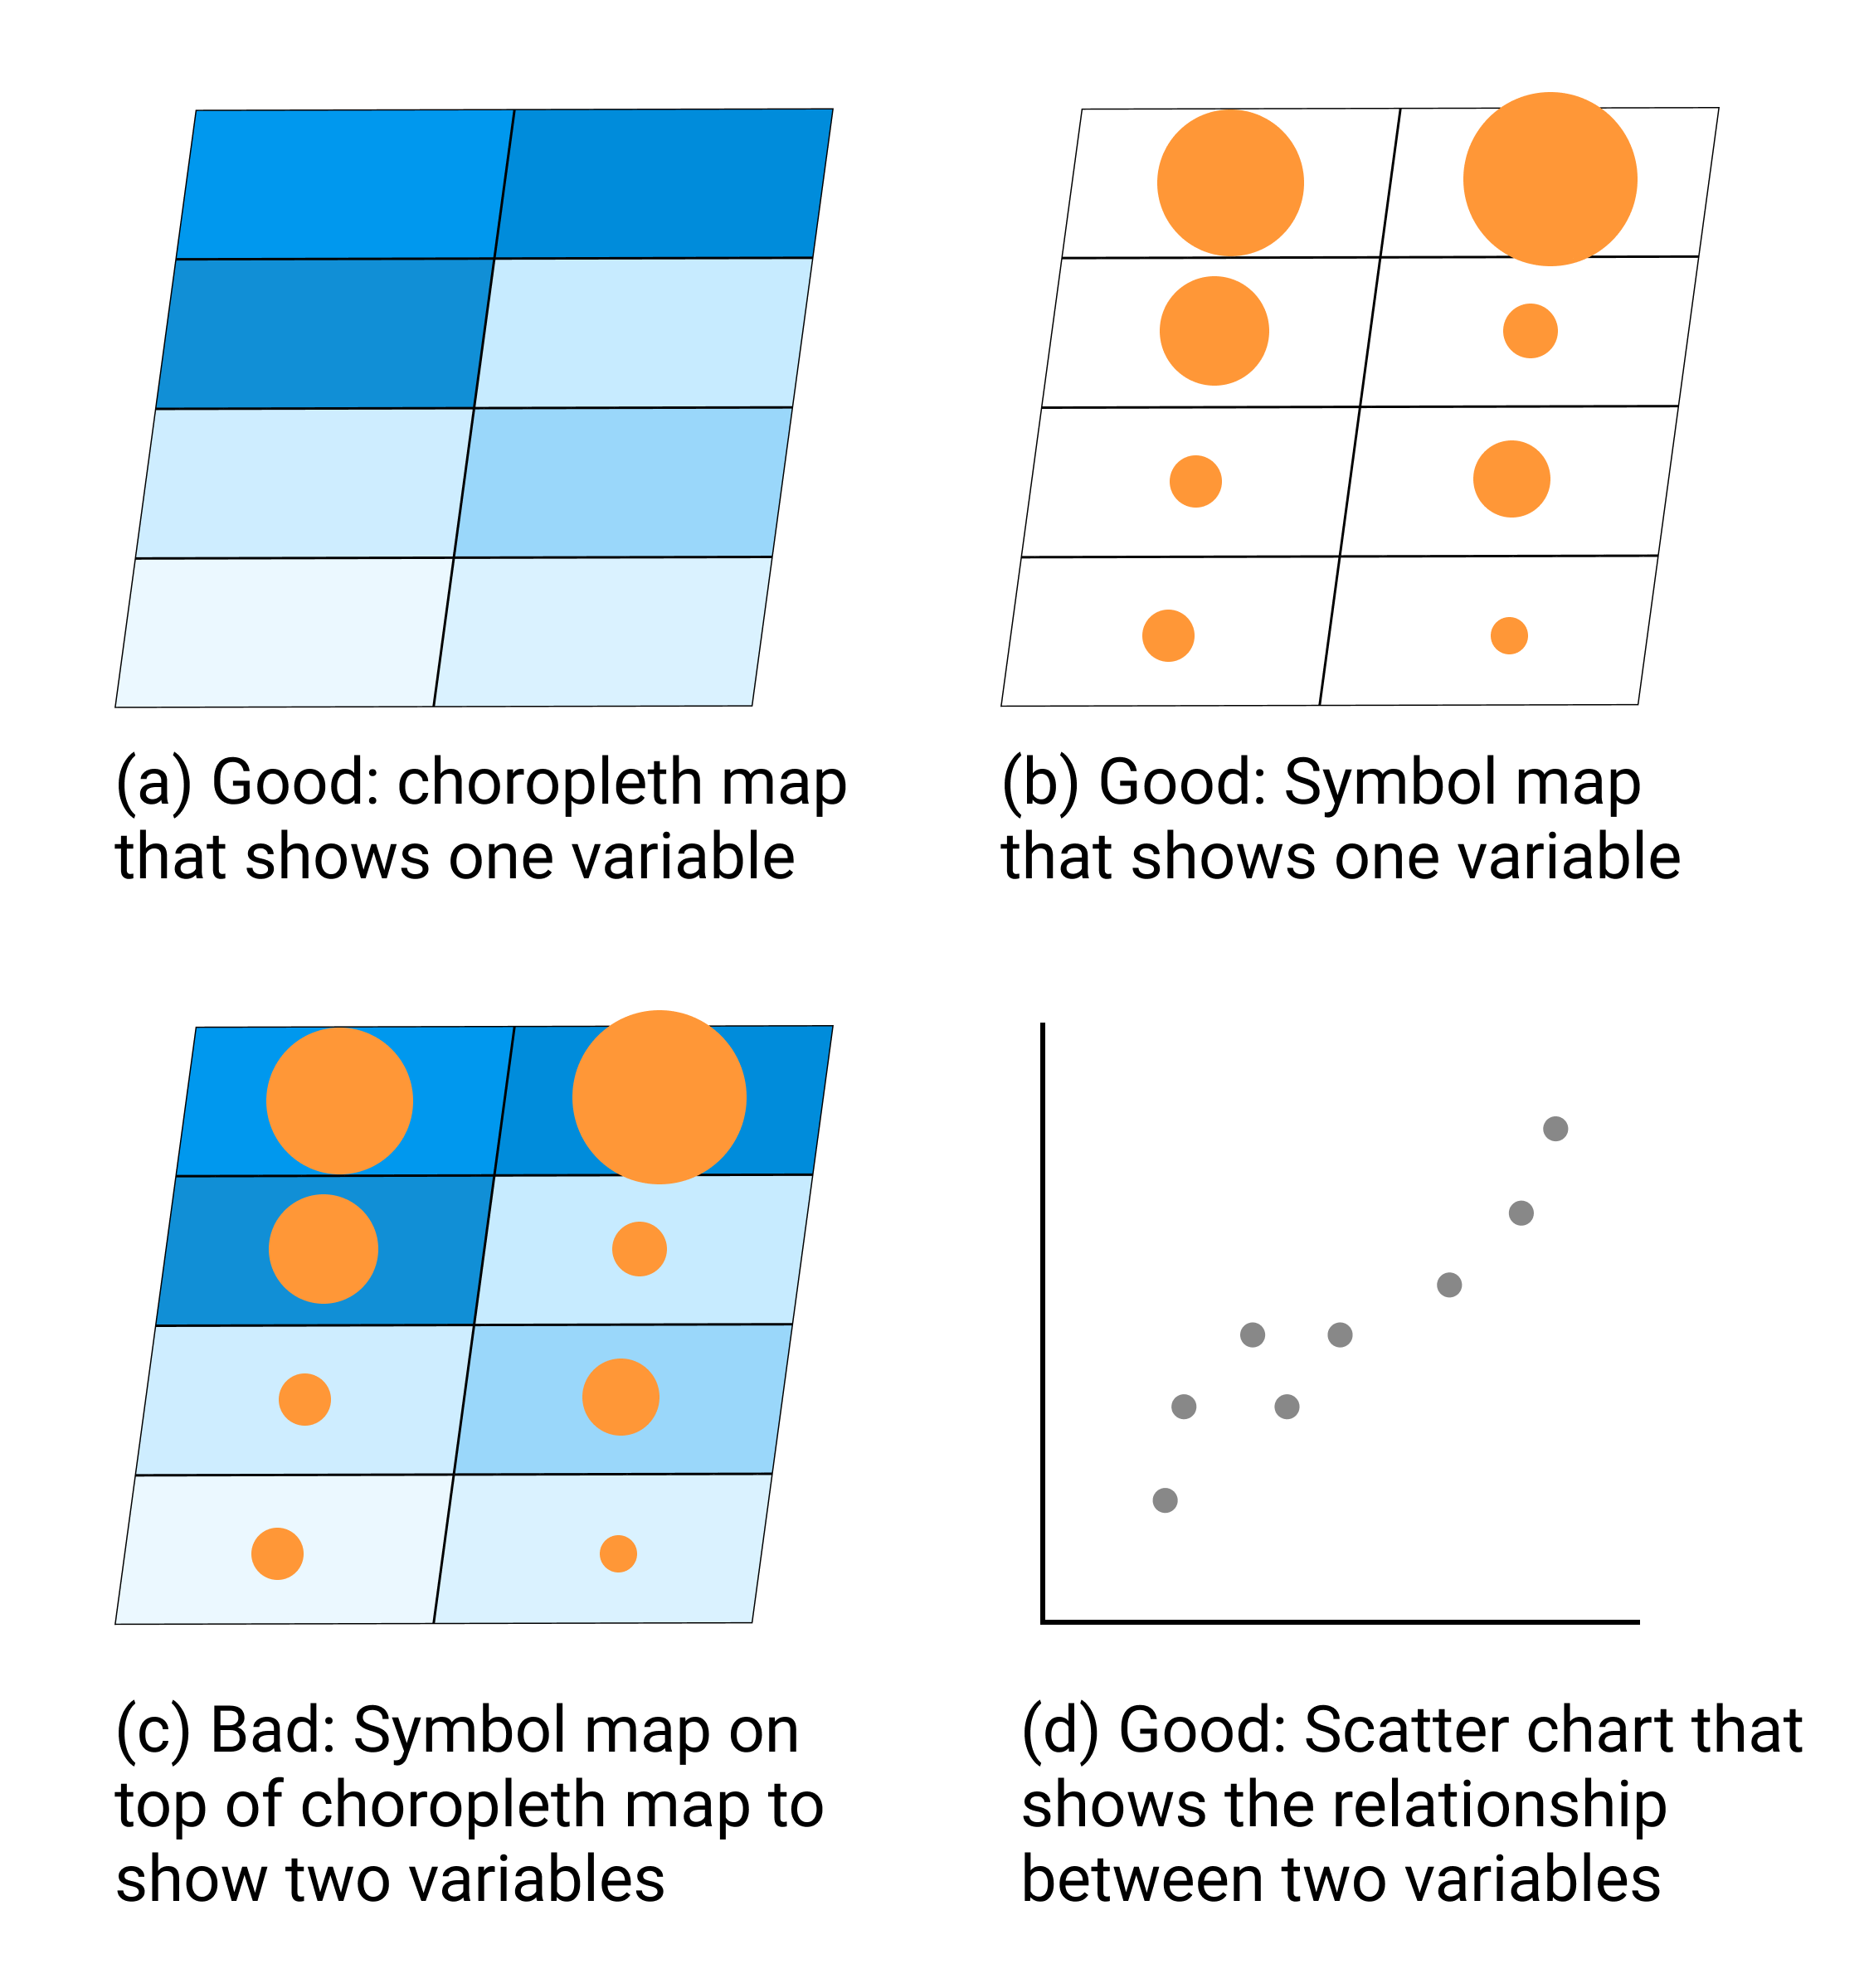 To compare two variables, such as income and education, avoid placing a symbol point map on top of a choropleth map. Instead, create a scatter chart, and consider pairing it with a choropleth map of one variable.